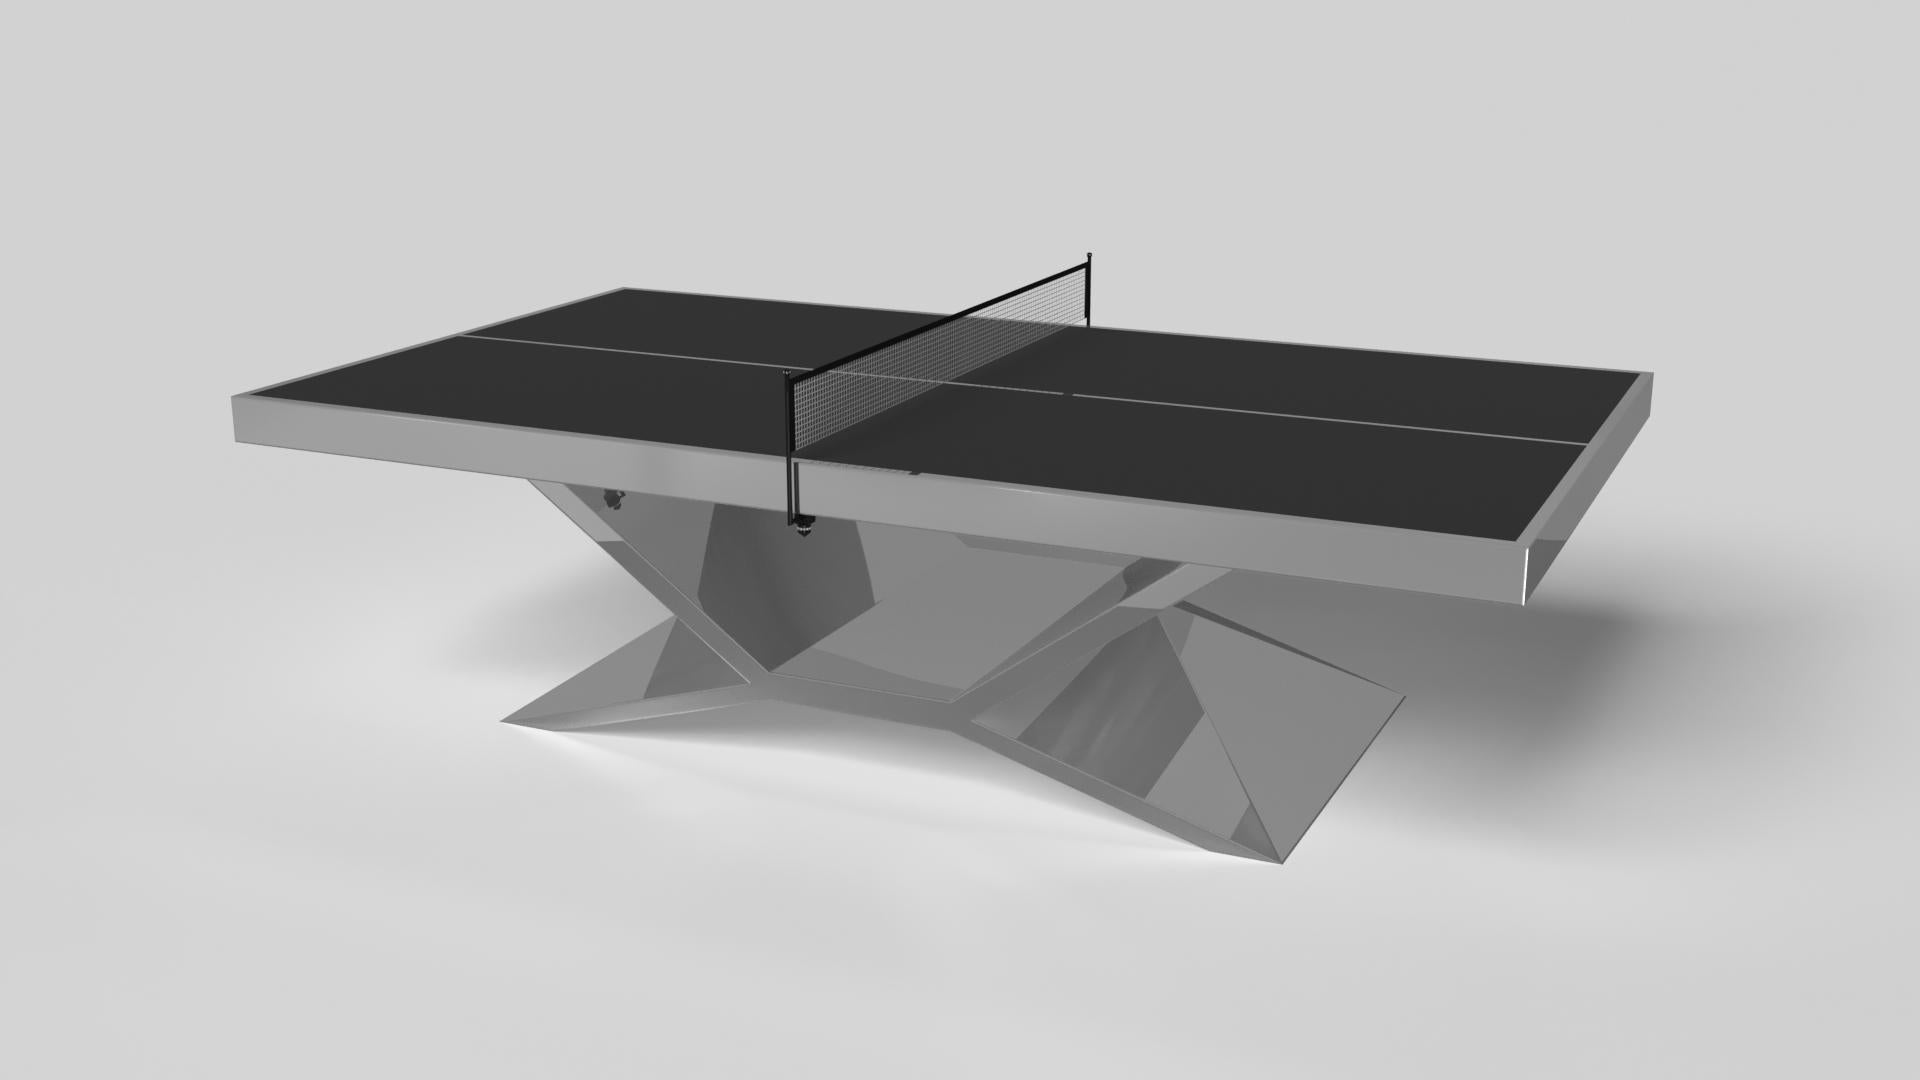 In chrome, the Kors table tennis table is a superior example of contrasting geometric forms. This table features an angular base that highlights the beauty of negative space from the front view. From the side view, it offers a completely different